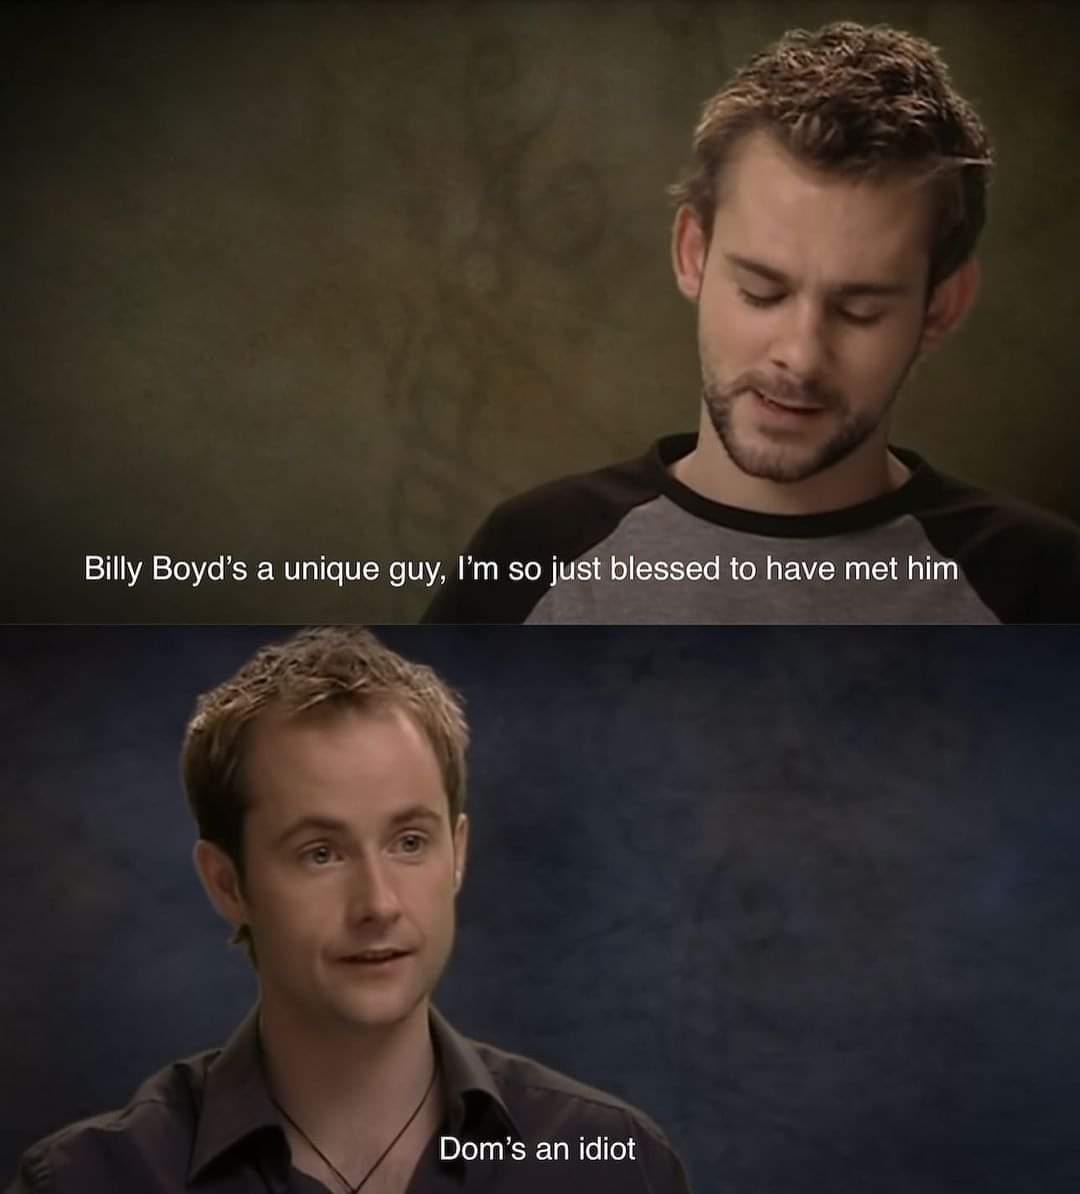 The funny thing is that in the movies the relation between their characters feels quite the opposite. 😅

#dominicmonaghan #billyboyd #lordoftherings #lotr